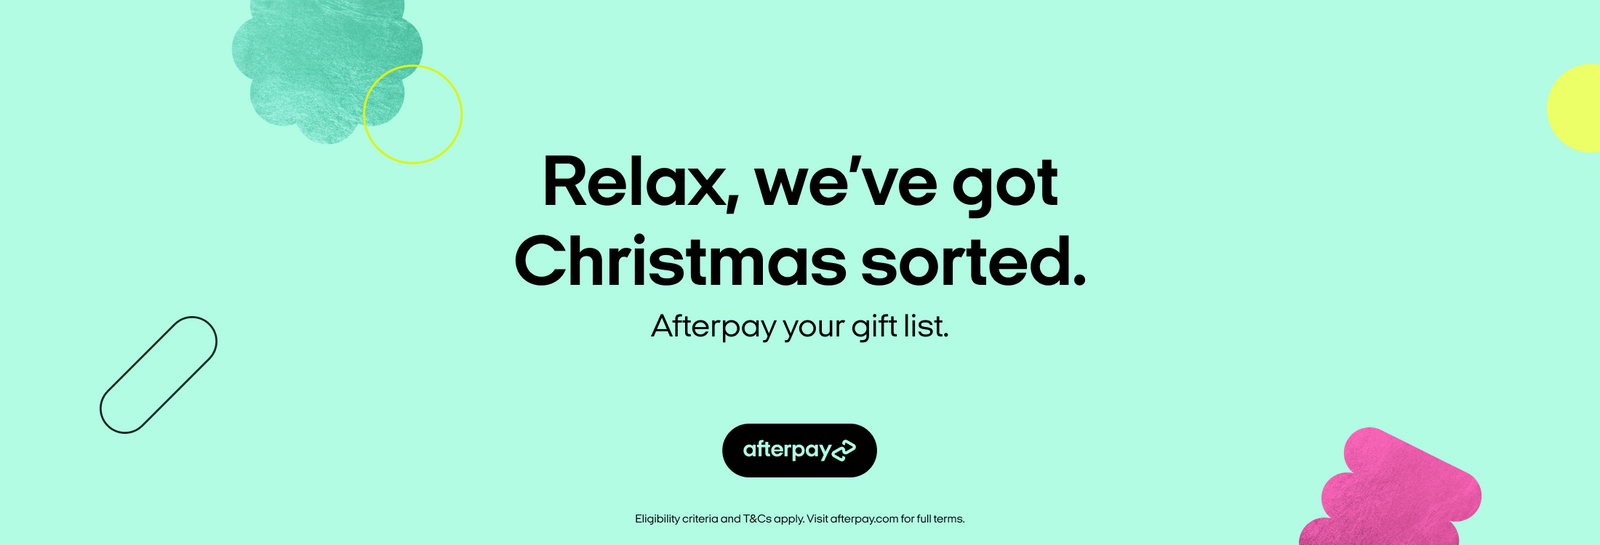 Afterpay Christmas Gifts